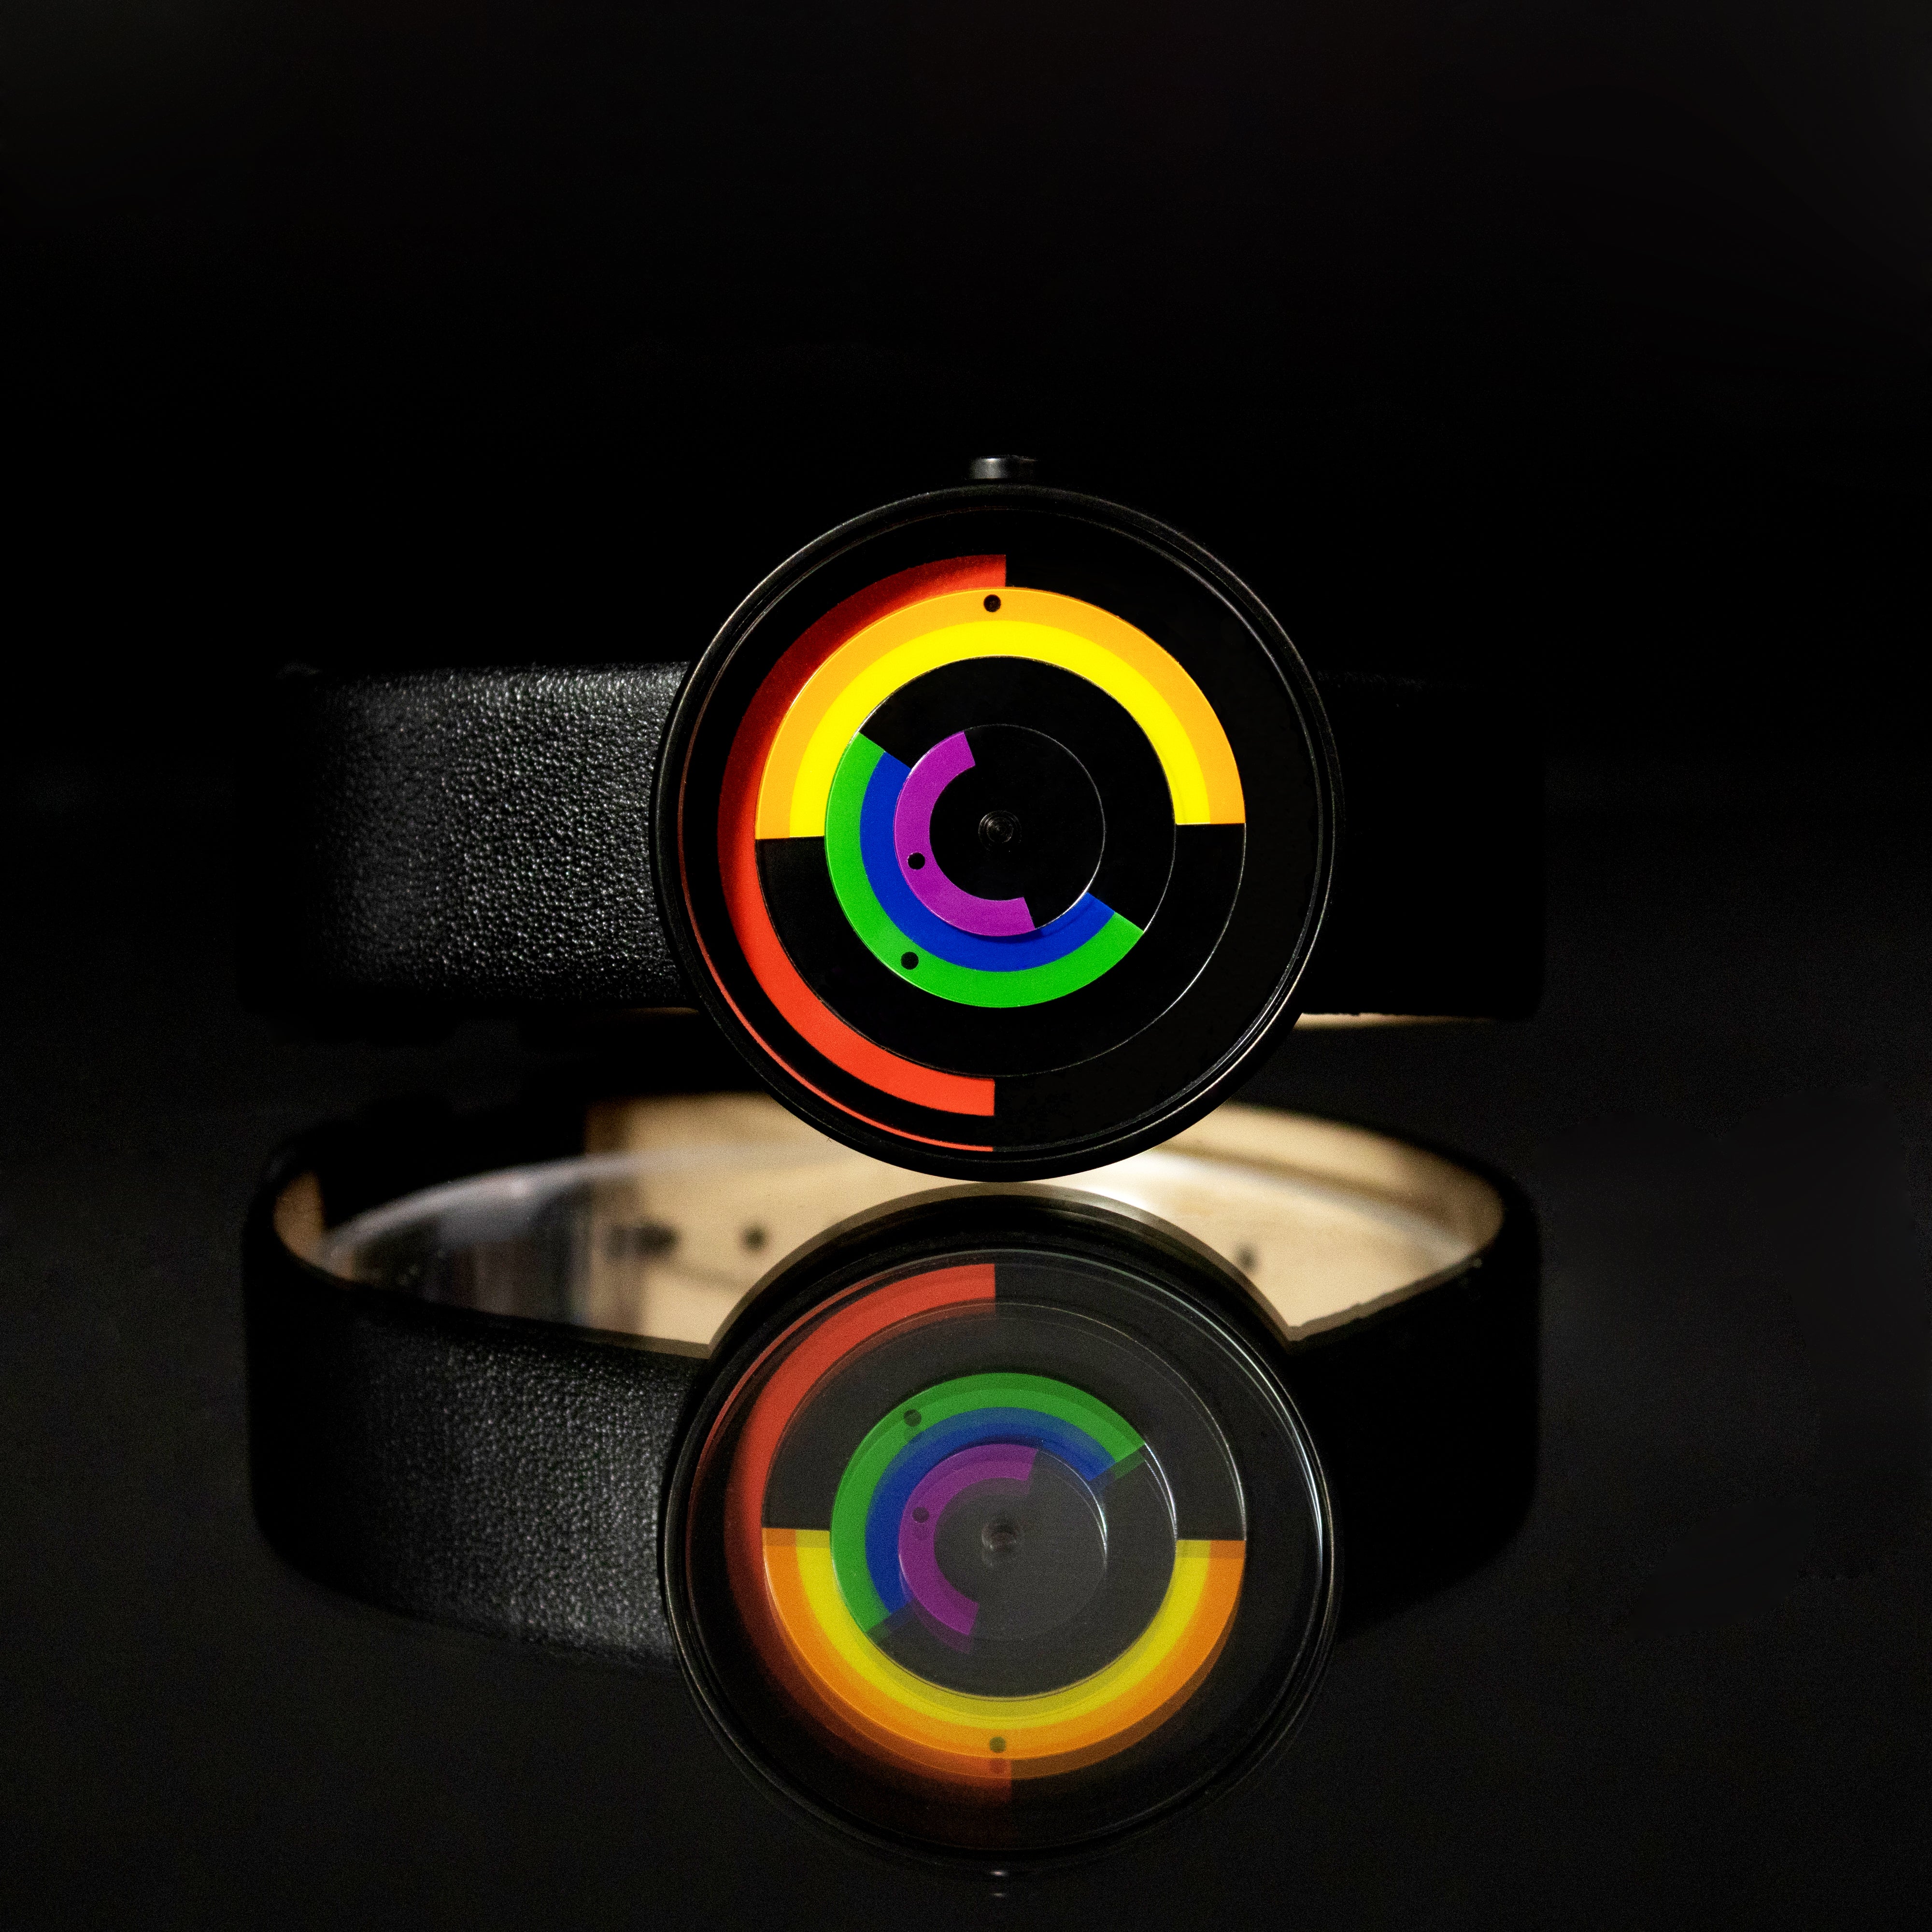 Pride - Projects Watches